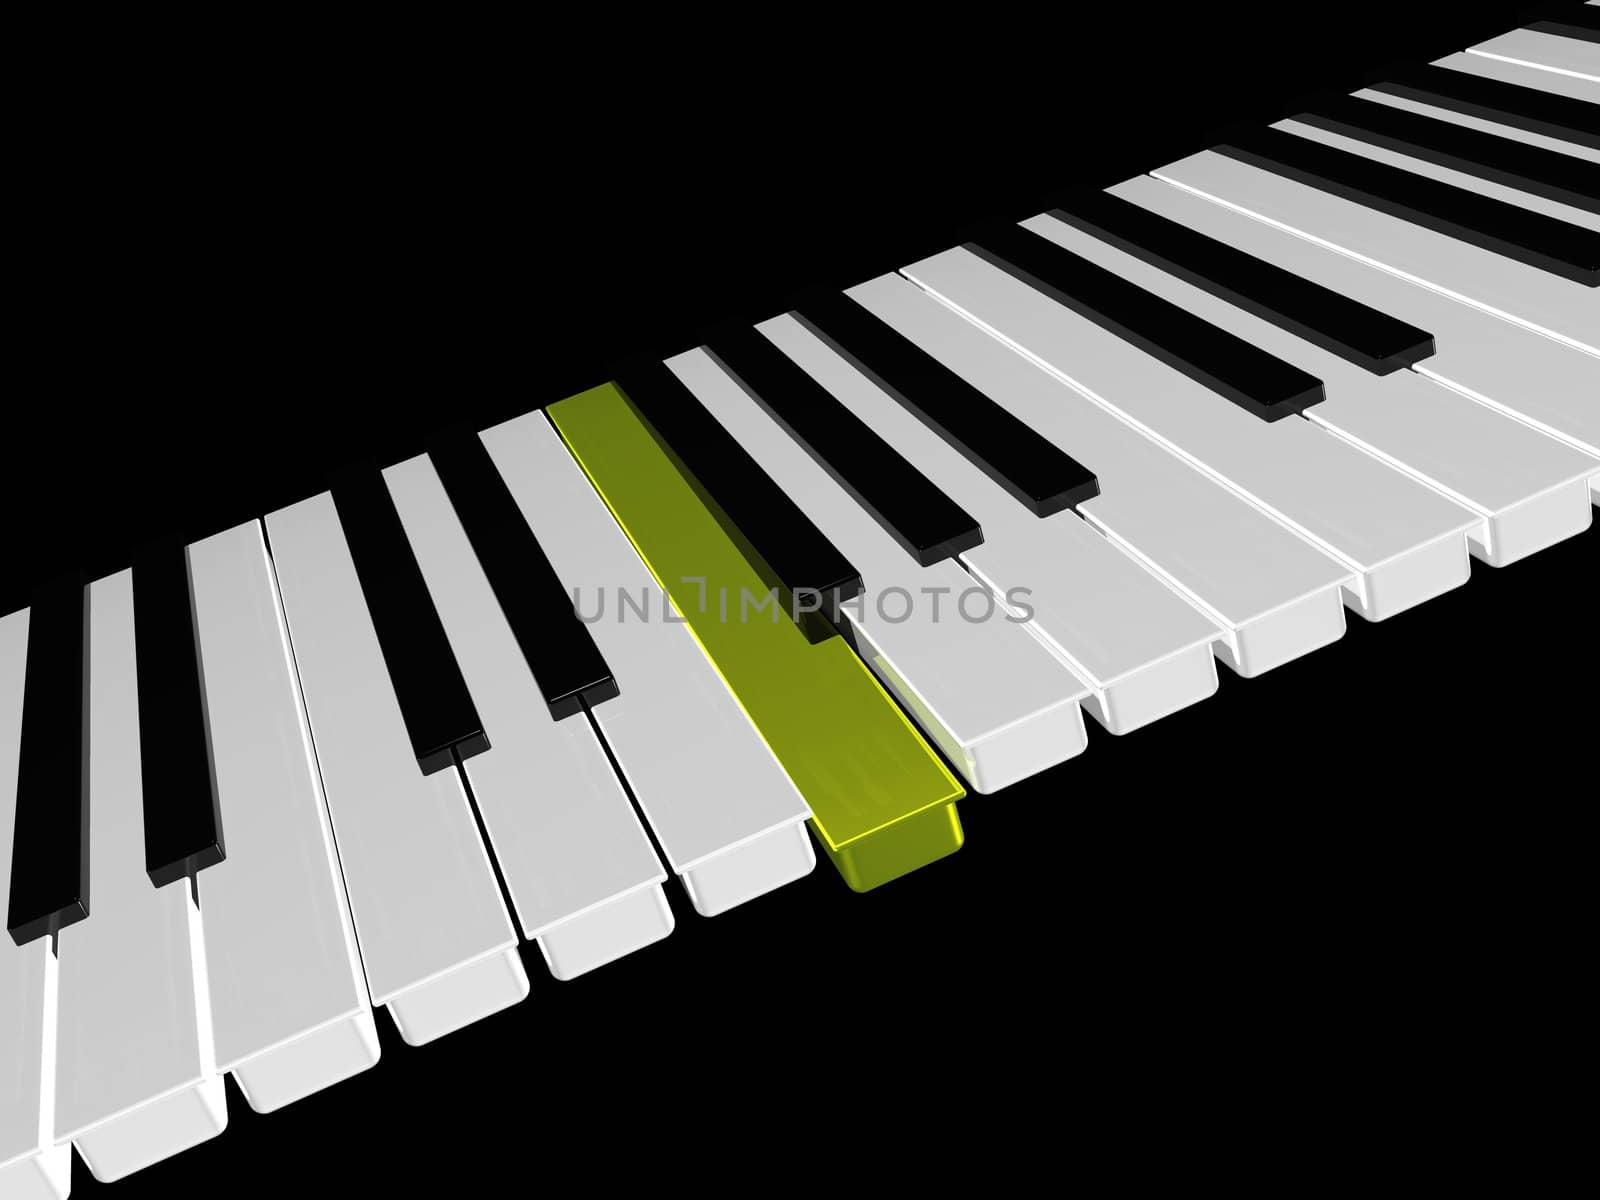 Piano keyboard With Gold Key On Black Background. 3d Render.
 